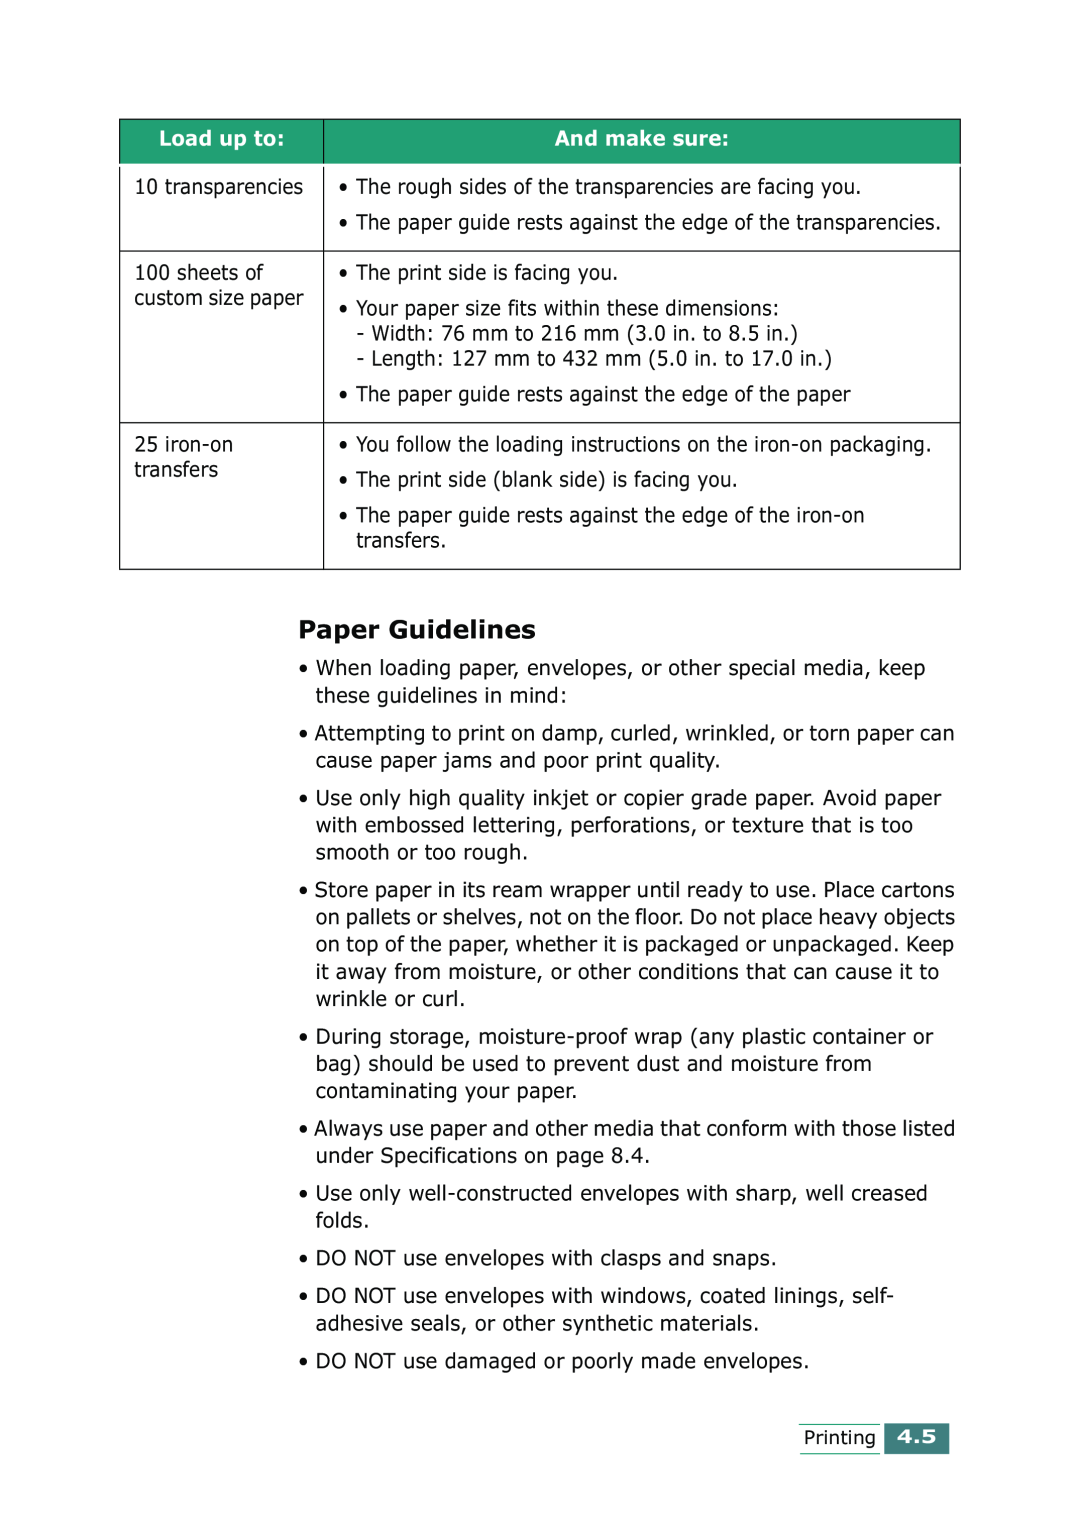 Samsung SCX-1100 Paper Guidelines, Load up to, And make sure, The paper guide rests against the edge of the transparencies 